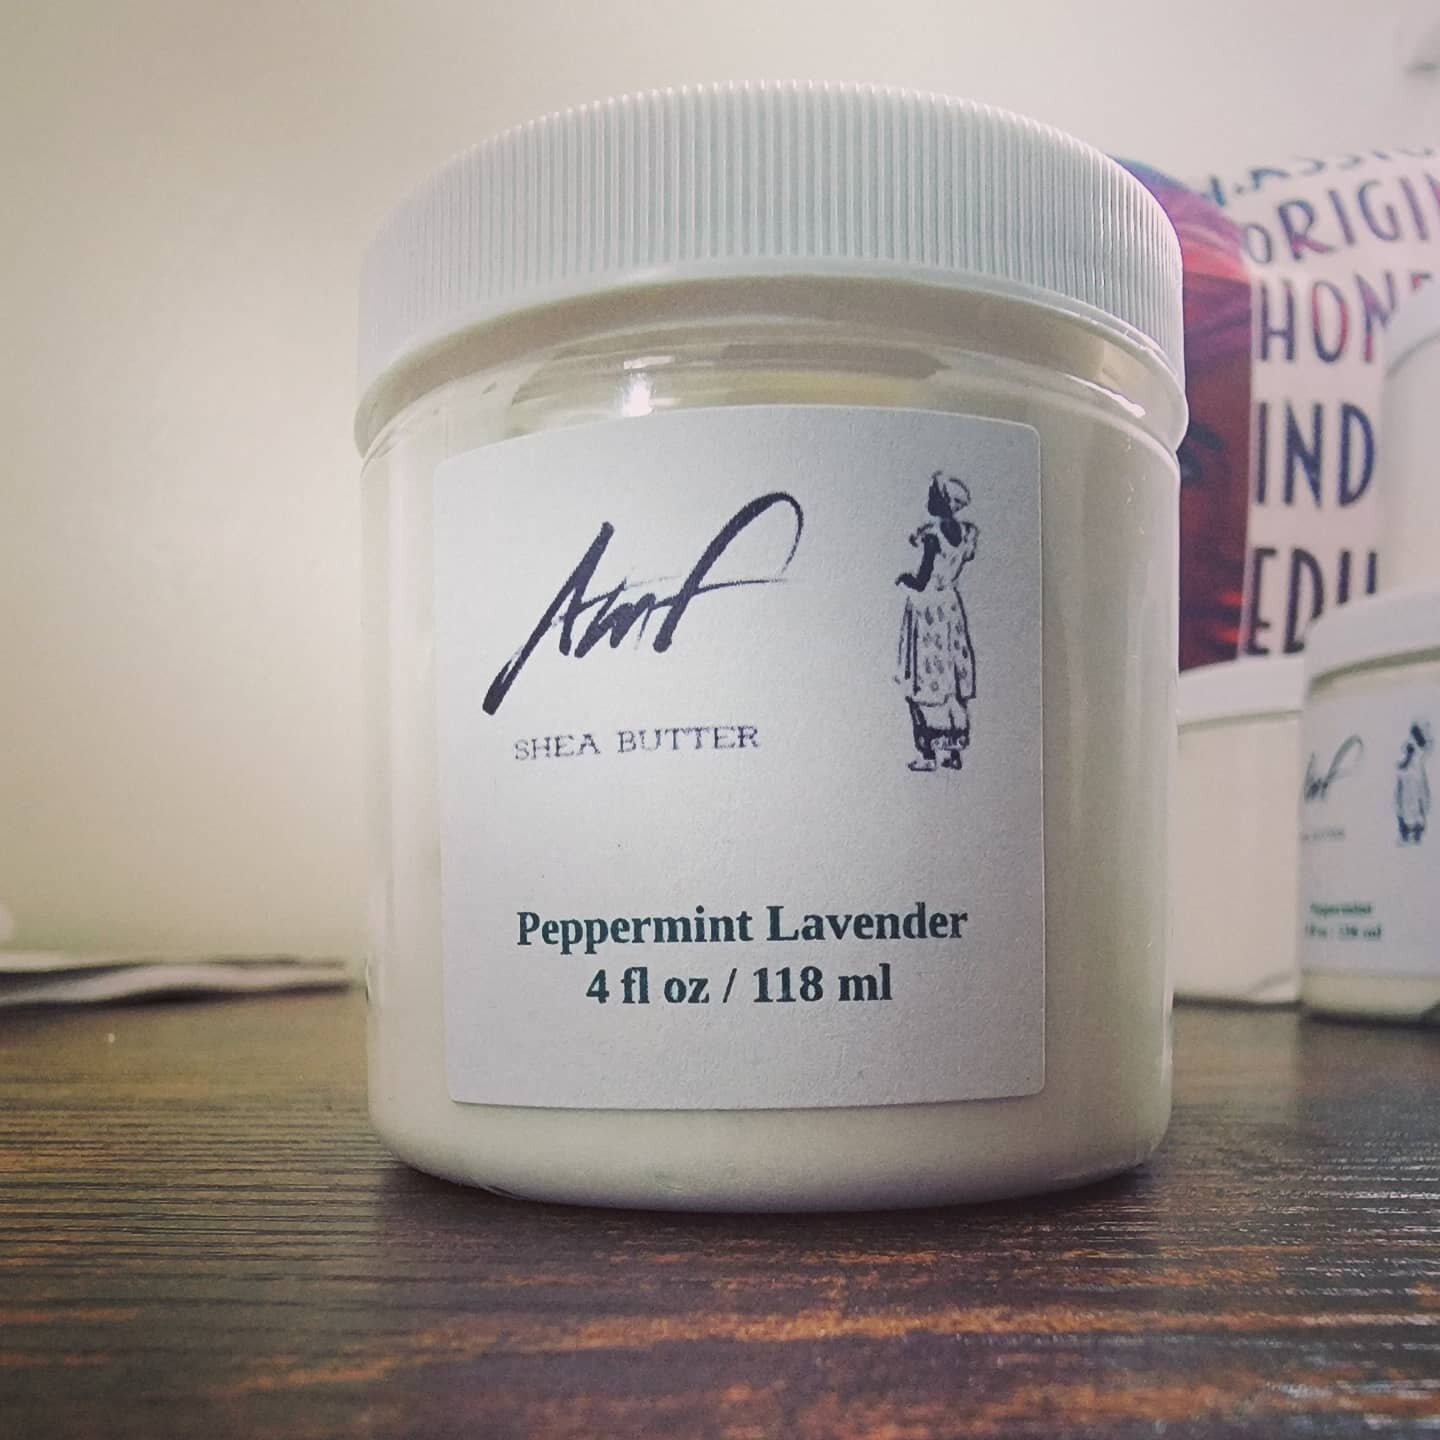 Last week to buy this product until it goes back in the shea butter vault! This will have you walking around smelling like a Peppermint paddy.

*will still be available for a custom order* 

www.amfshea.com